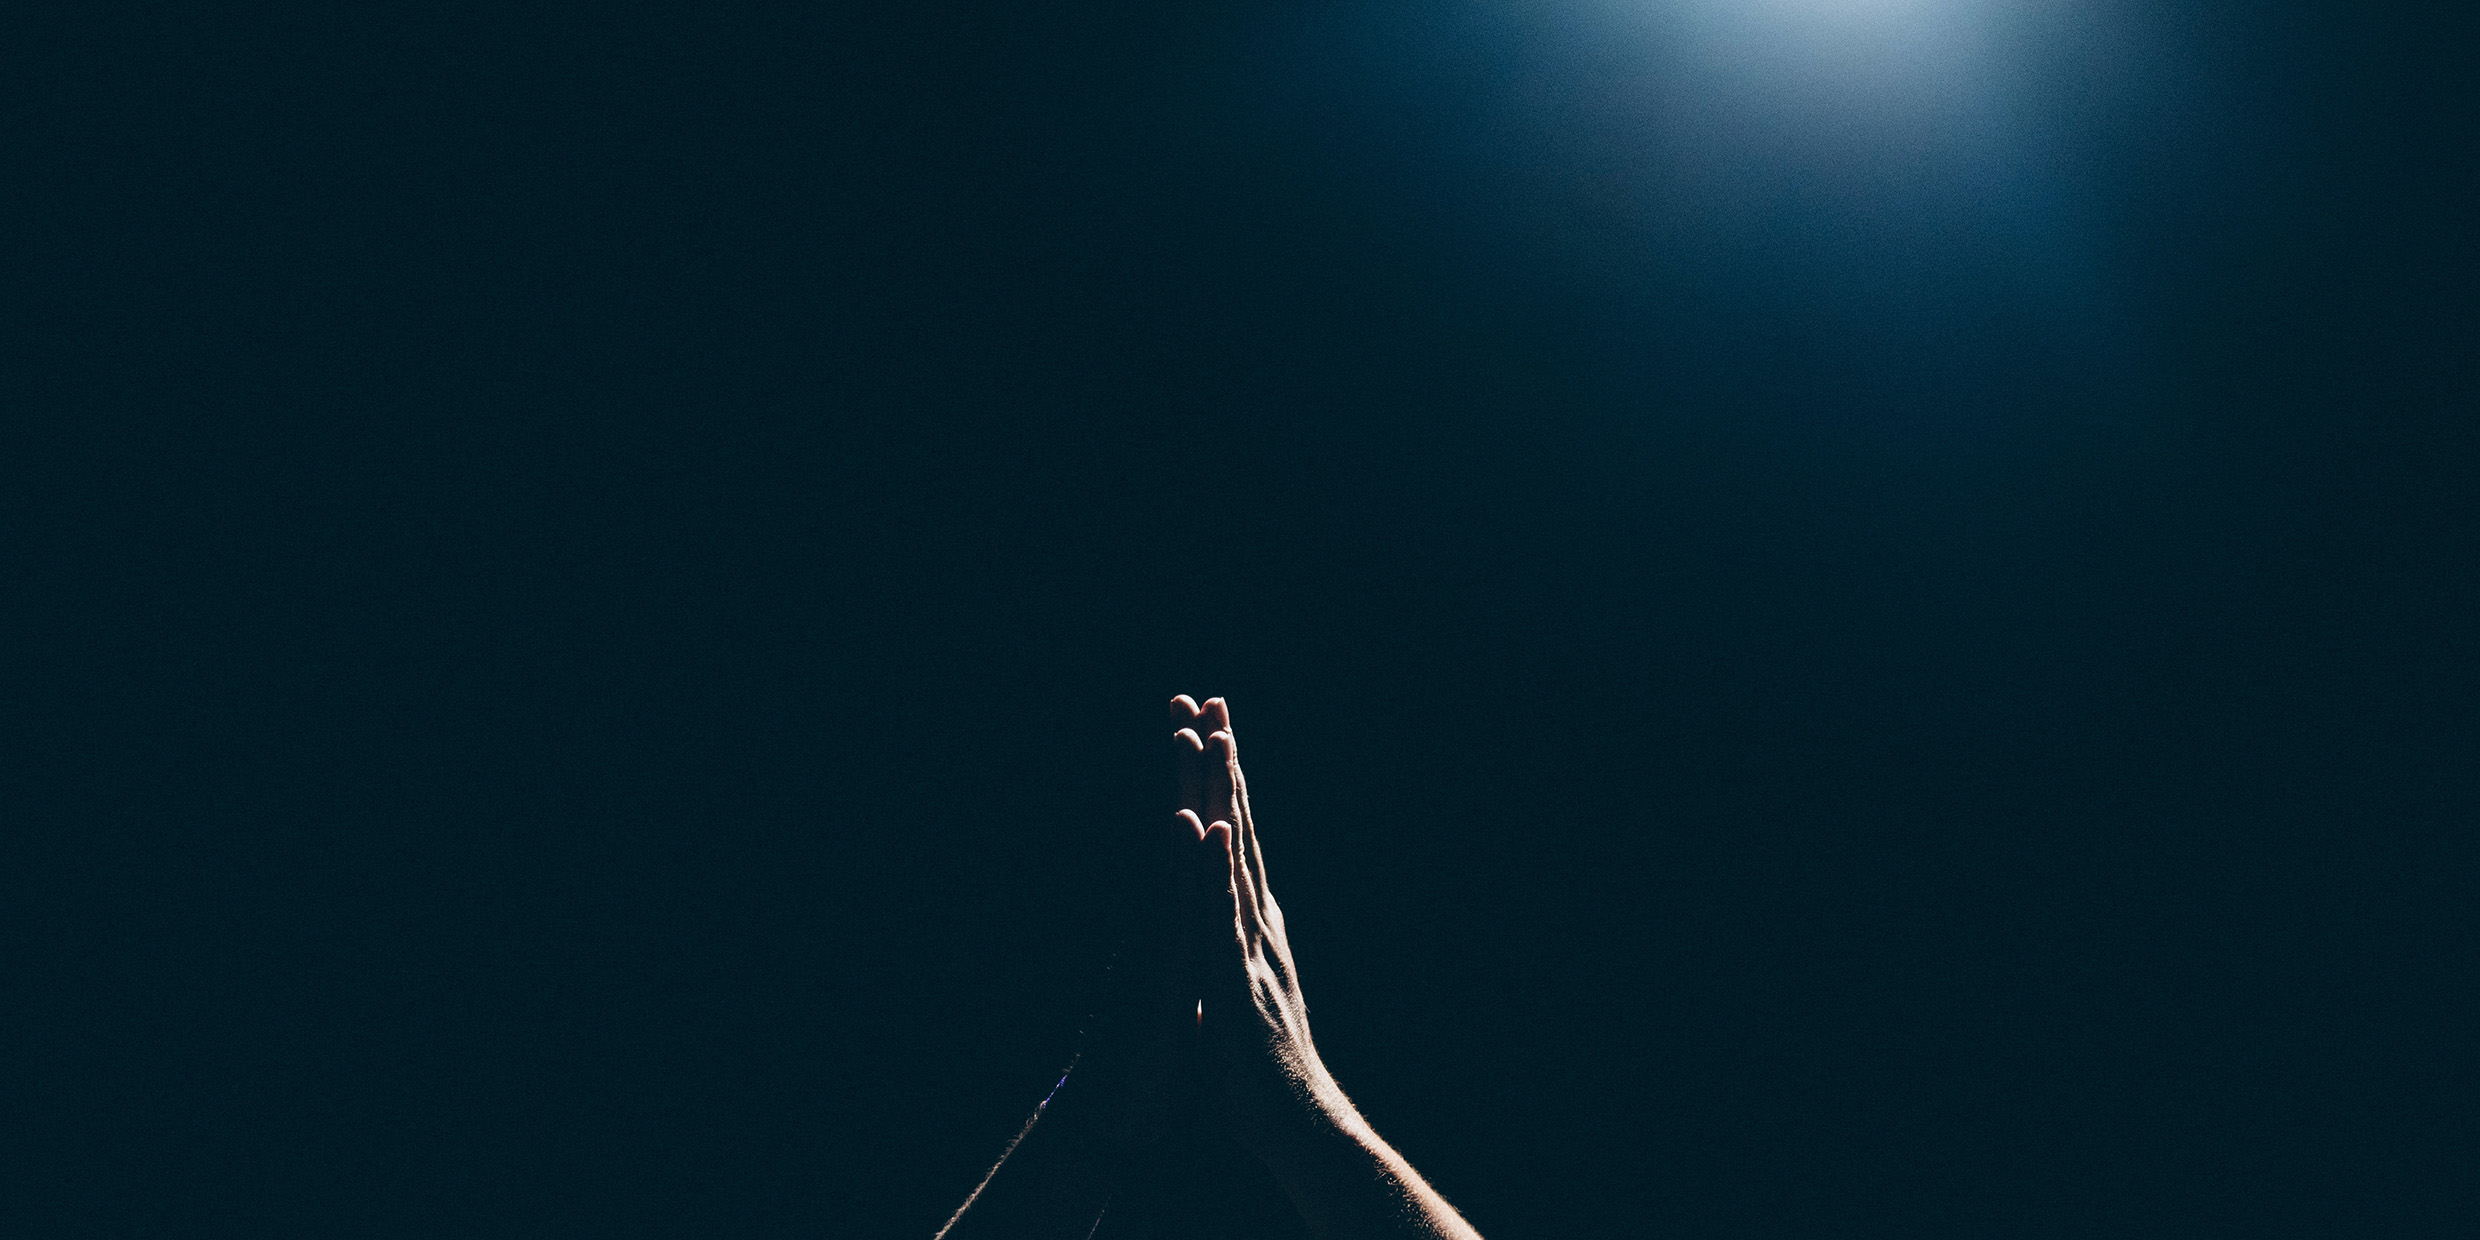 Image of praying hands with a dark background